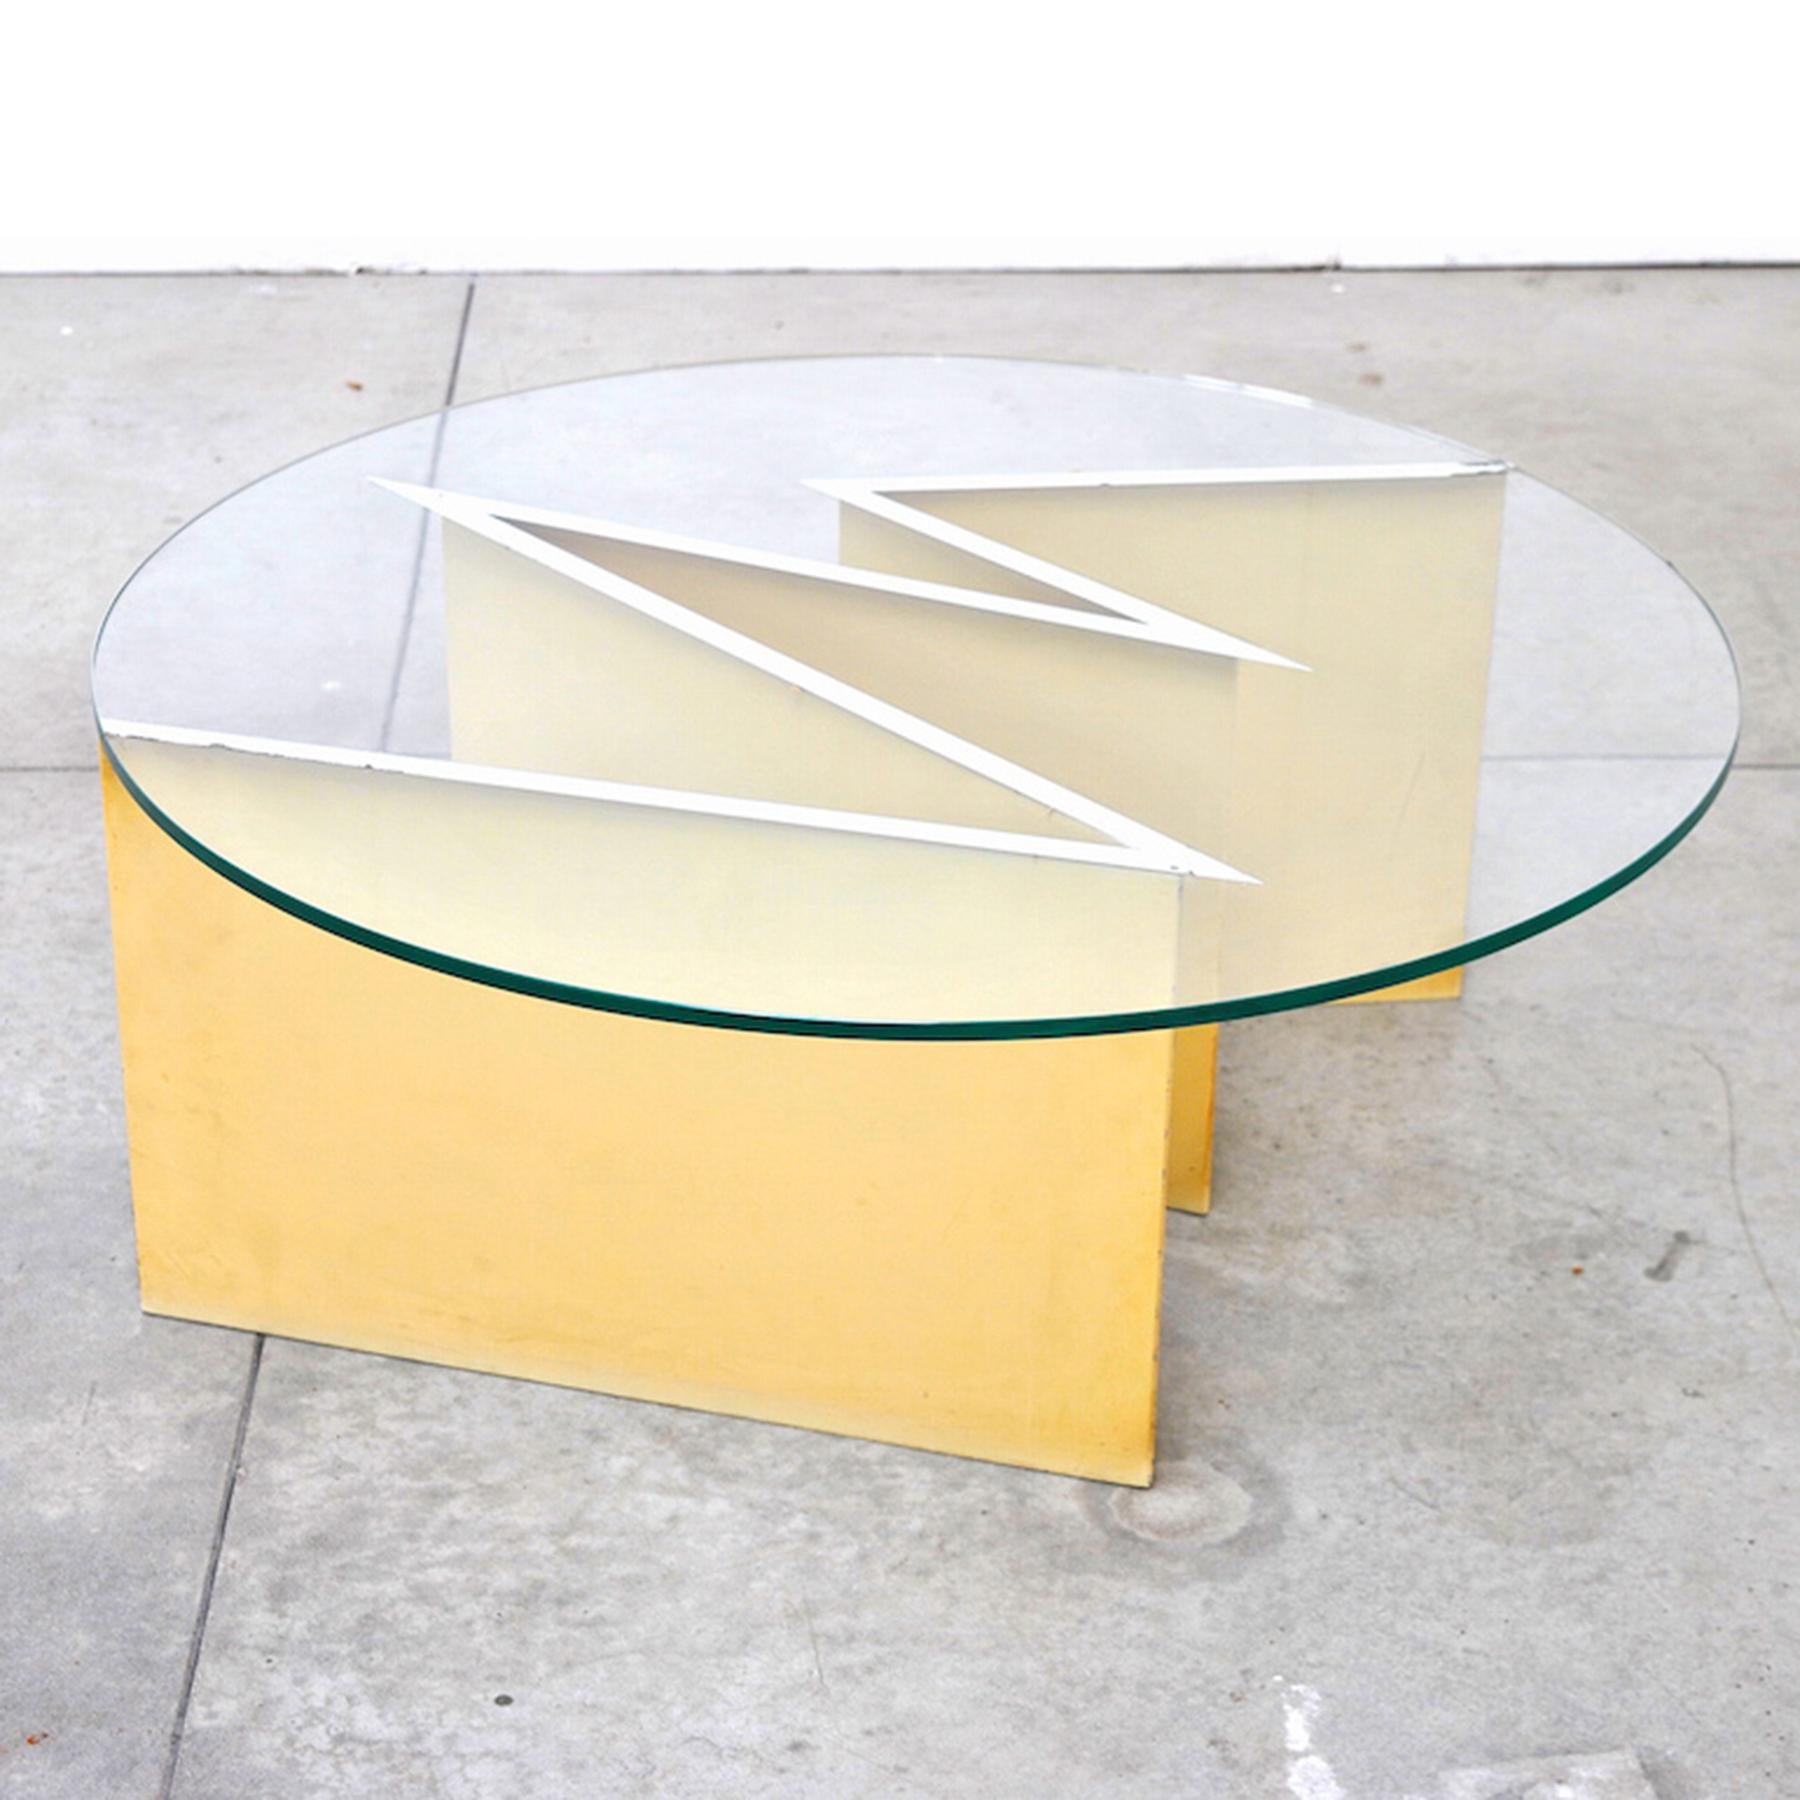 Midcentury Italian coffee table by Giuseppe Raimondi for Cristal Art mod 3101 Zeus iron base and a circular top in glass, 1960s. The glass was made in order to follow the shape of the base.